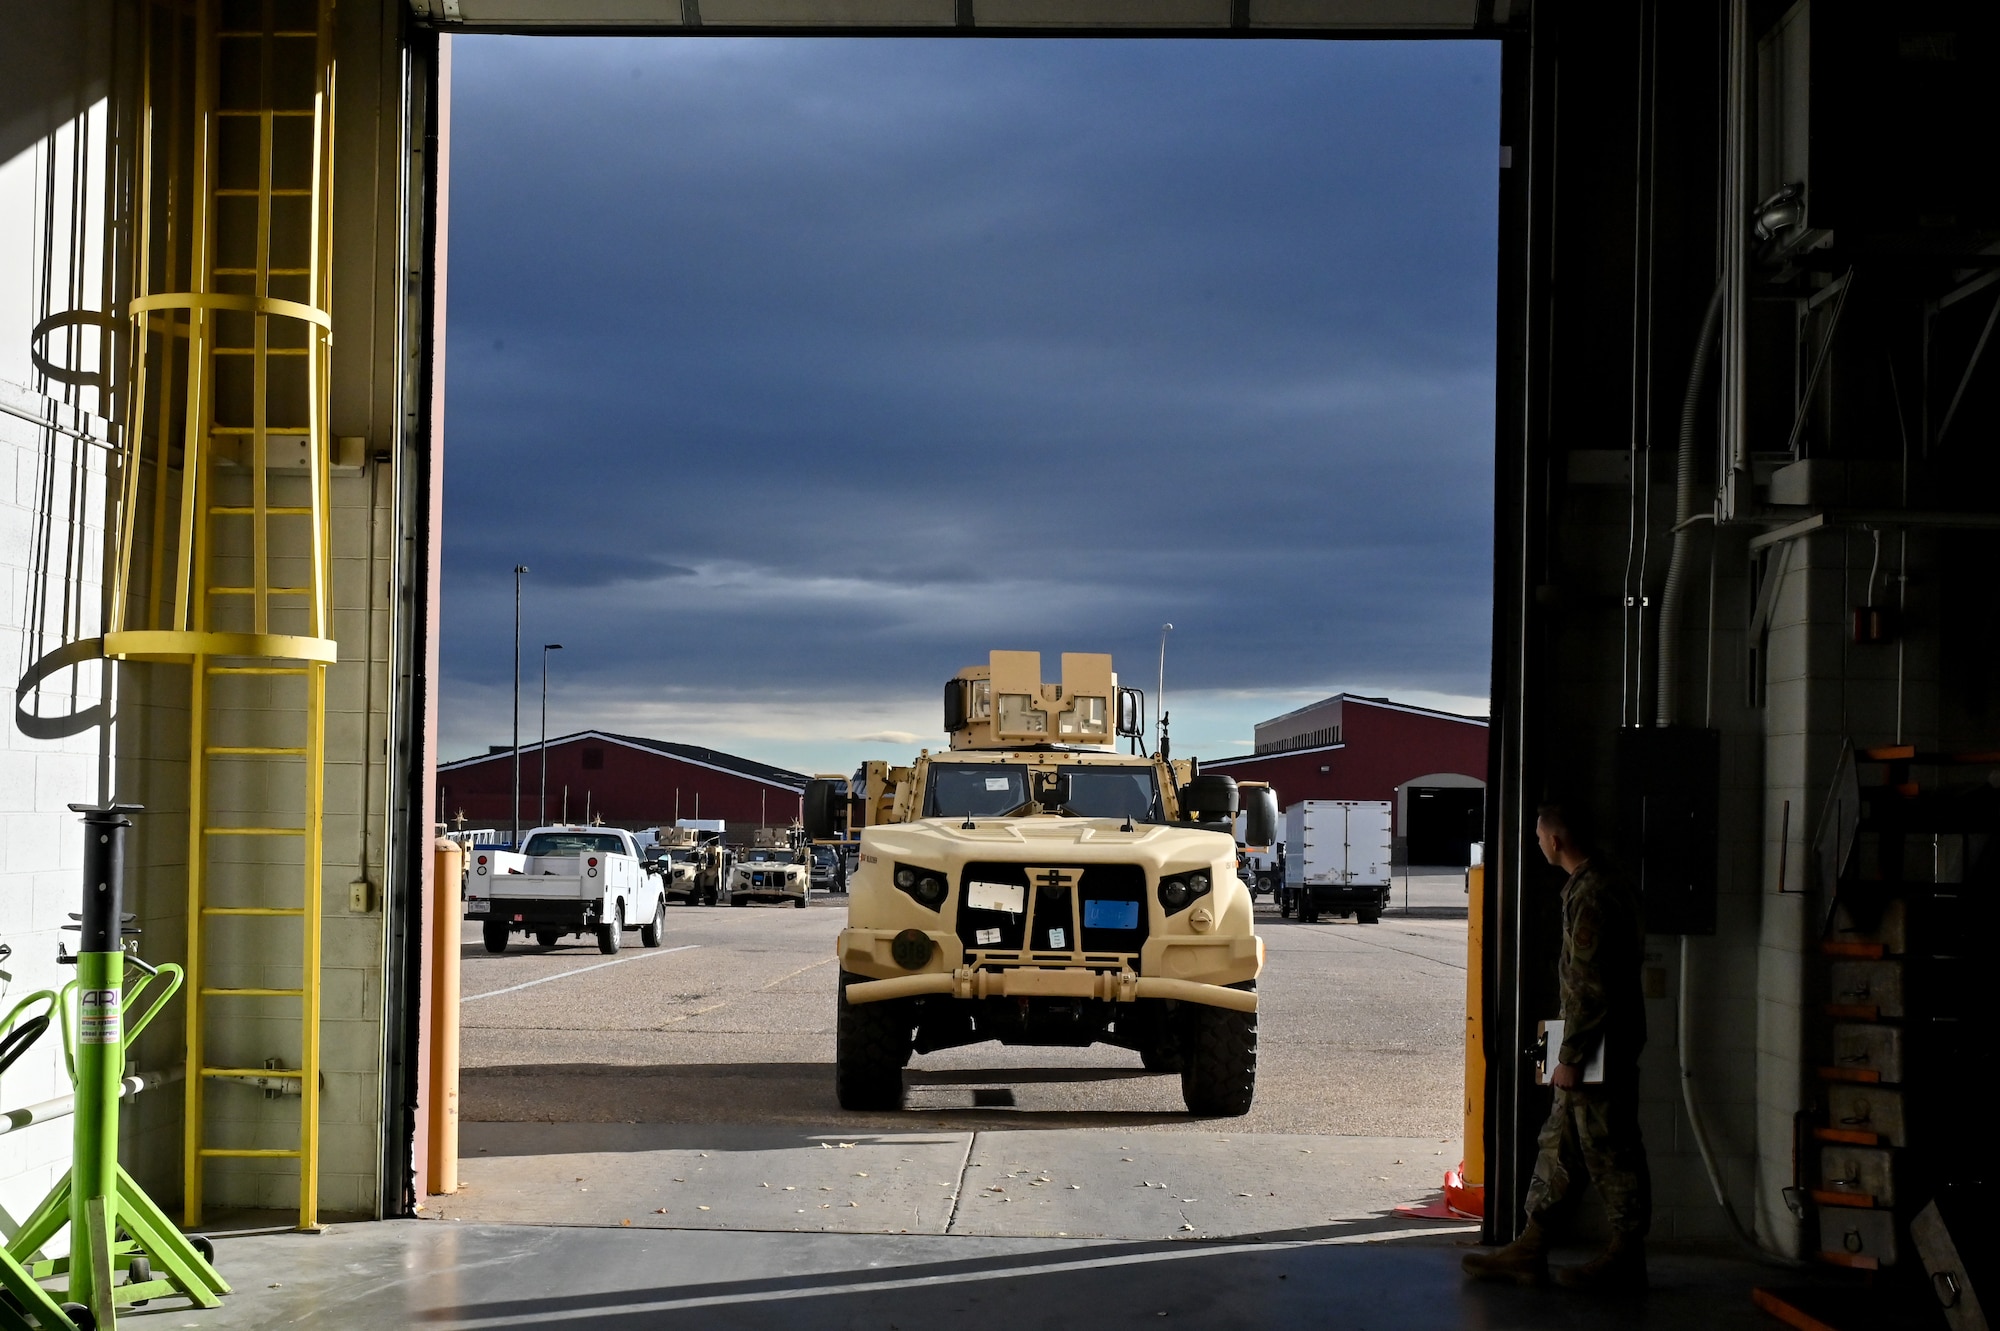 Mark Bramman, 90th Logistics Readiness Squadron vehicle maintenance craftsman, drives a Joint Light Tactical Vehicle into the maintenance bay before performing a limited technical inspection on F.E. Warren Air Force Base, Wyoming, Oct 25, 2022. The 90 LRS is tasked with preparing the next generation of security forces vehicles sent to protect the 90th Missile Wing’s ICBM system as part of Air Force Global Strike Command’s priority to modernize. (U.S. Air Force photo by Joseph Coslett)